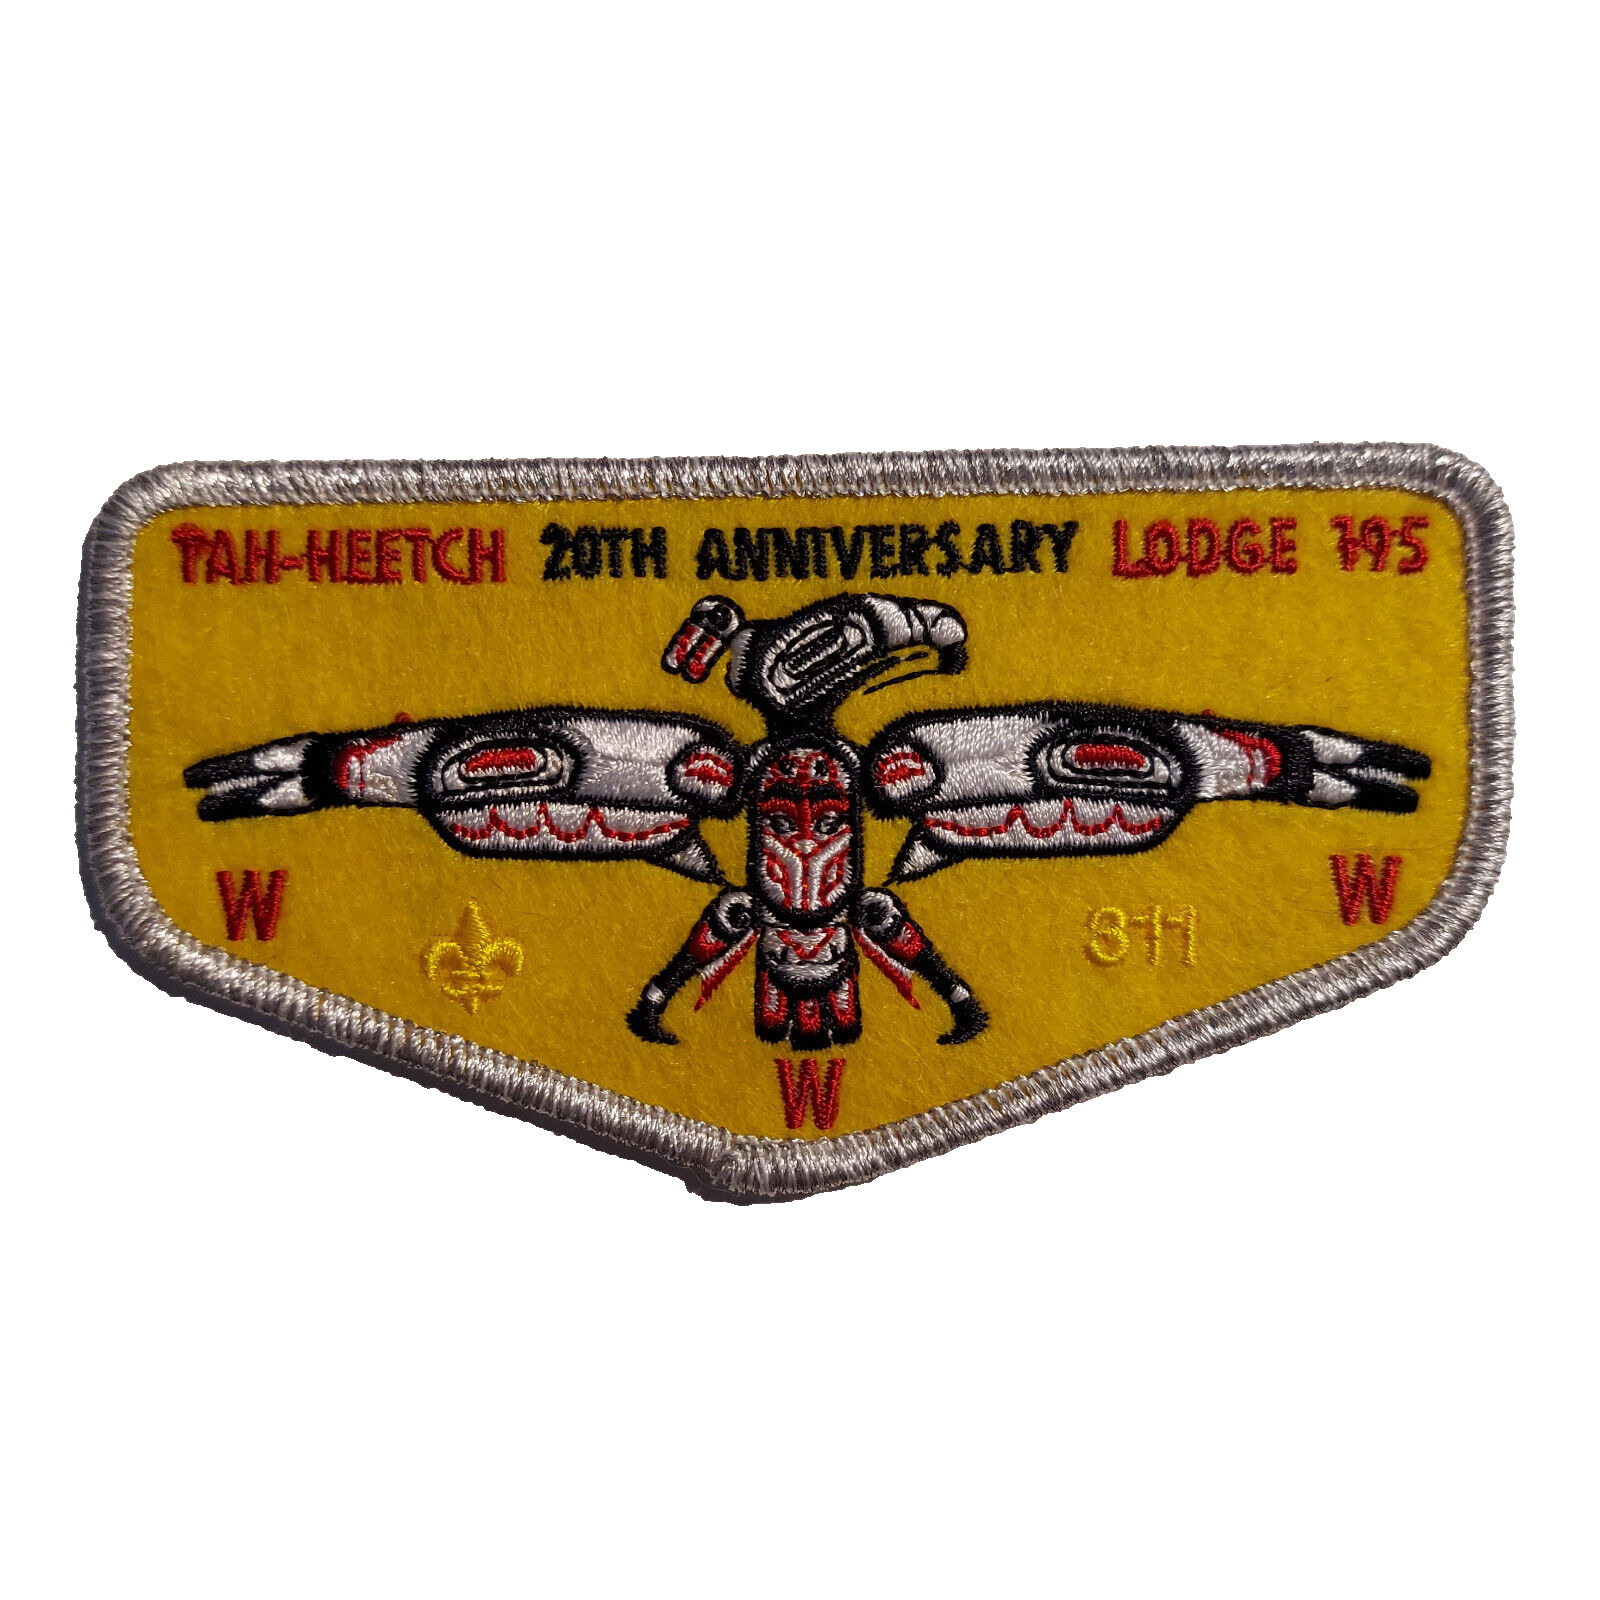 Boy Scouts BSA Order Of The Arrow Tah-Heetch 20th Anniv Lodge Flap White Border